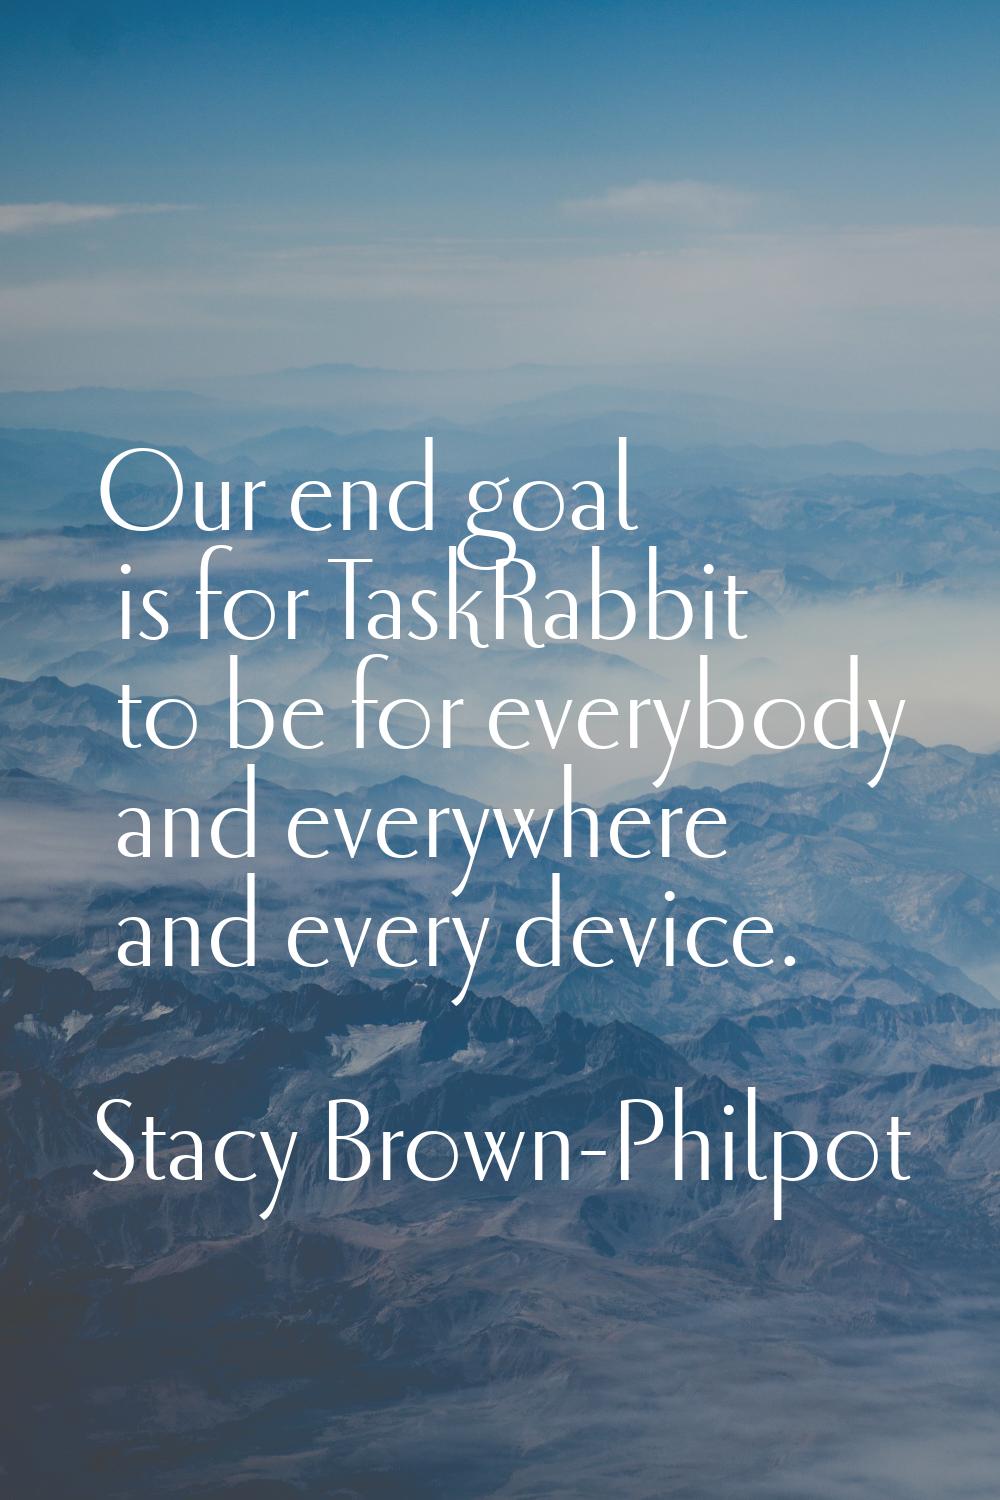 Our end goal is for TaskRabbit to be for everybody and everywhere and every device.